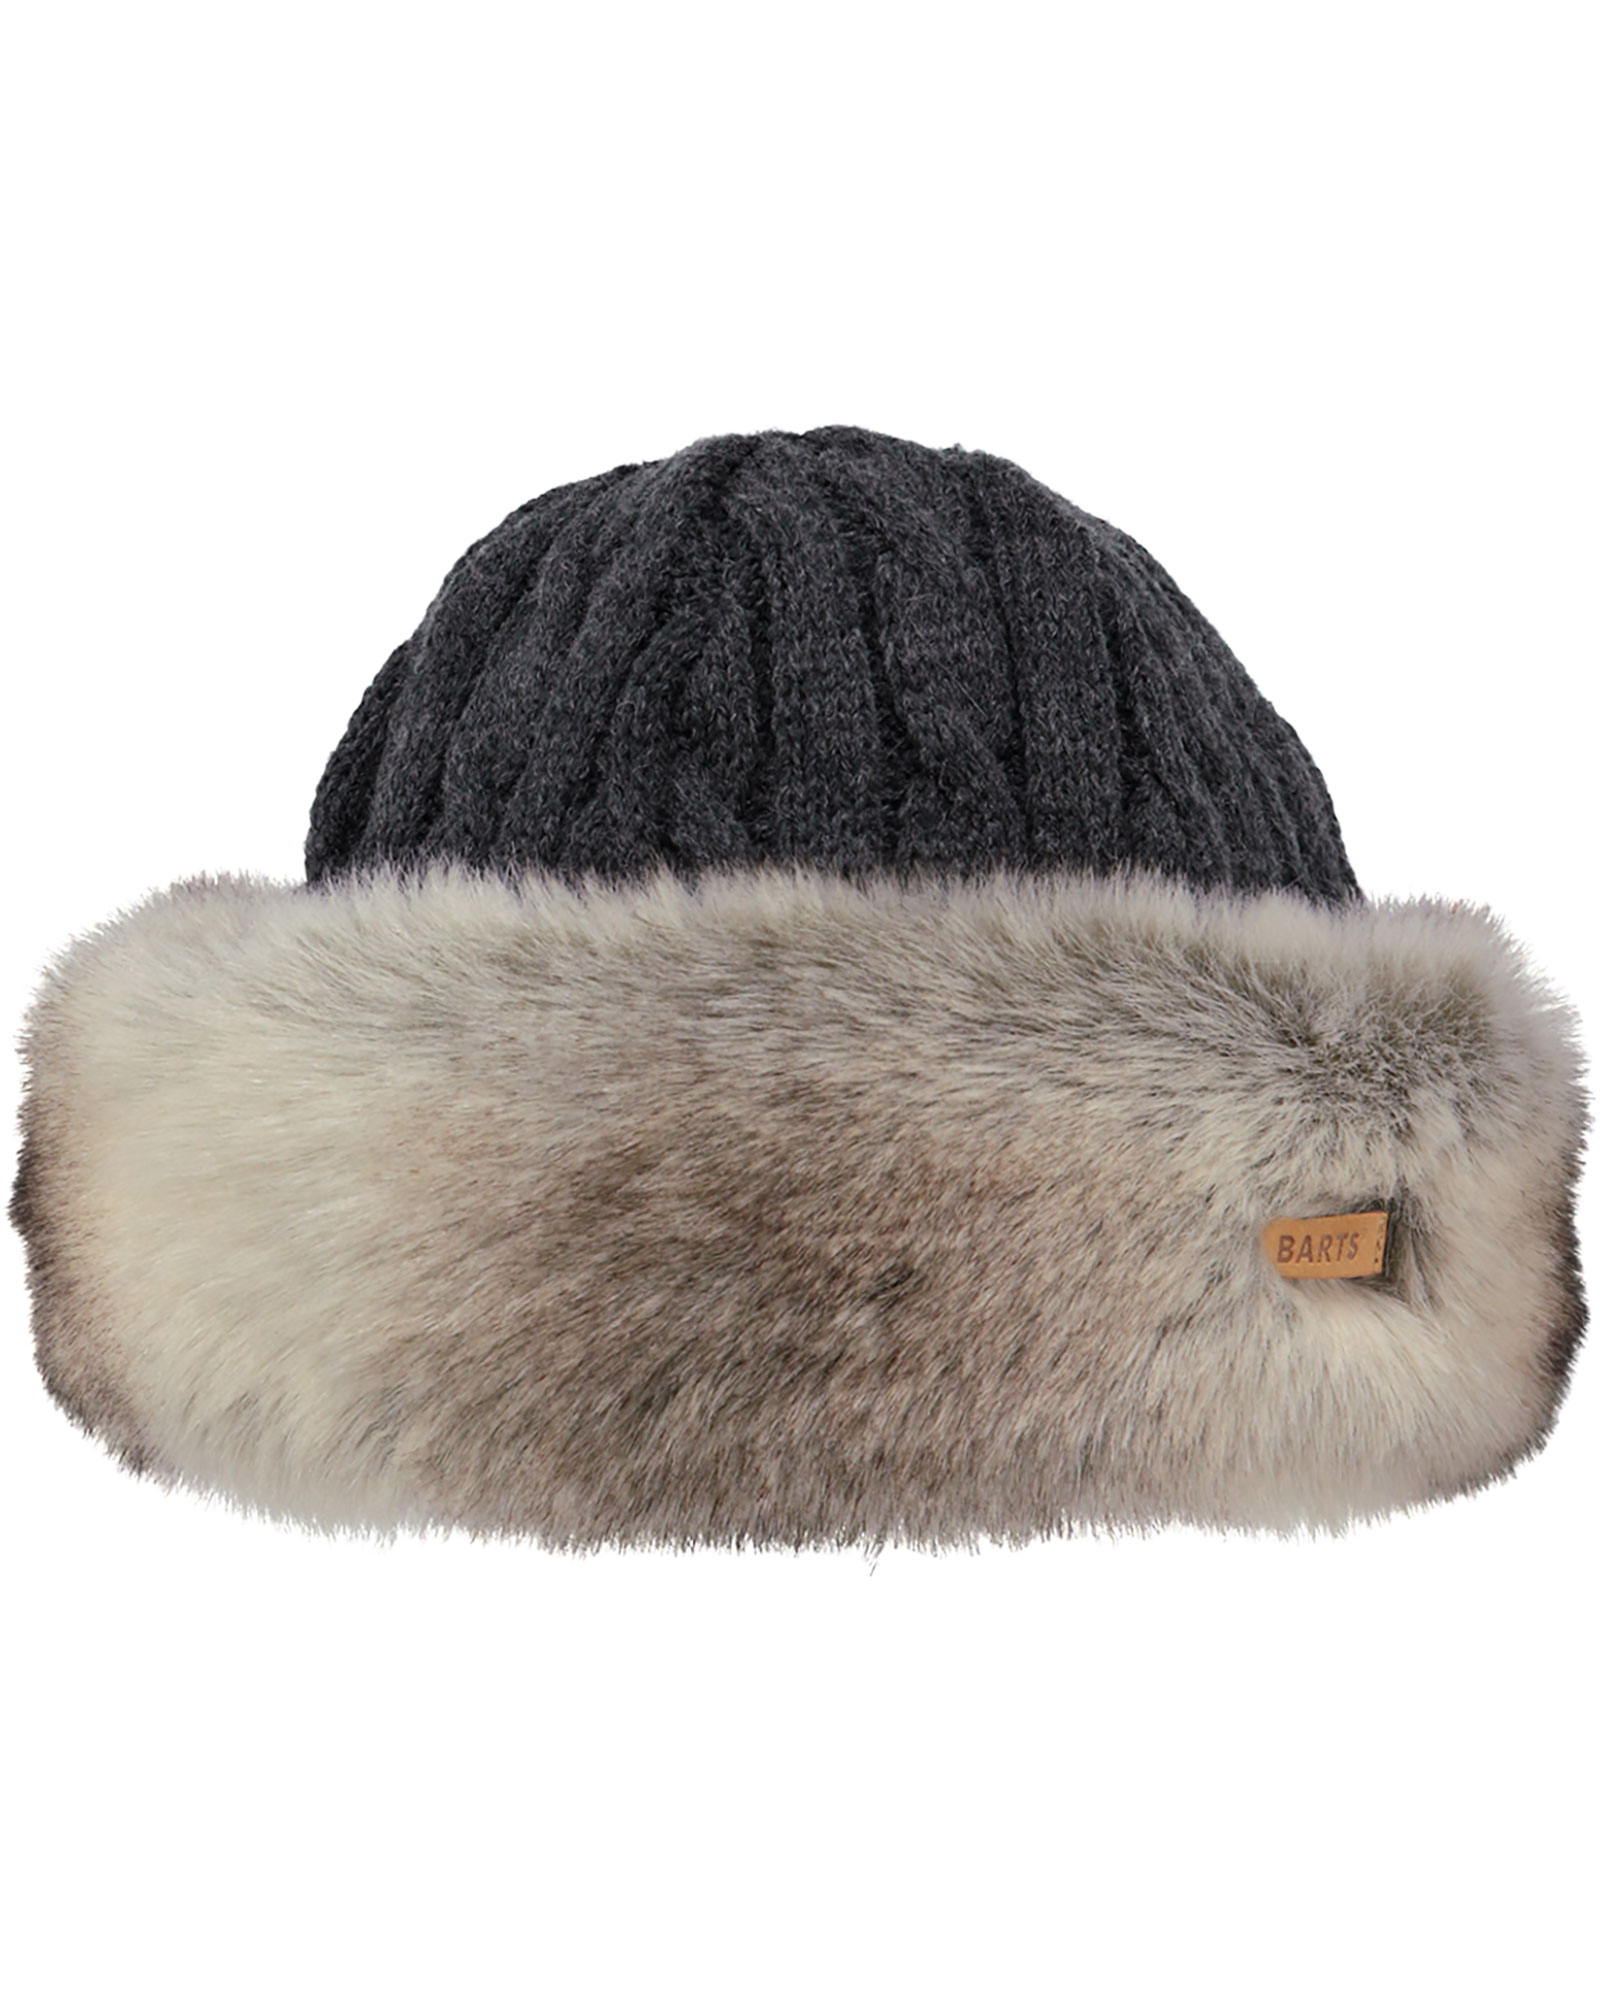 Barts Women’s Fur Cable Bandhat - Heather Brown